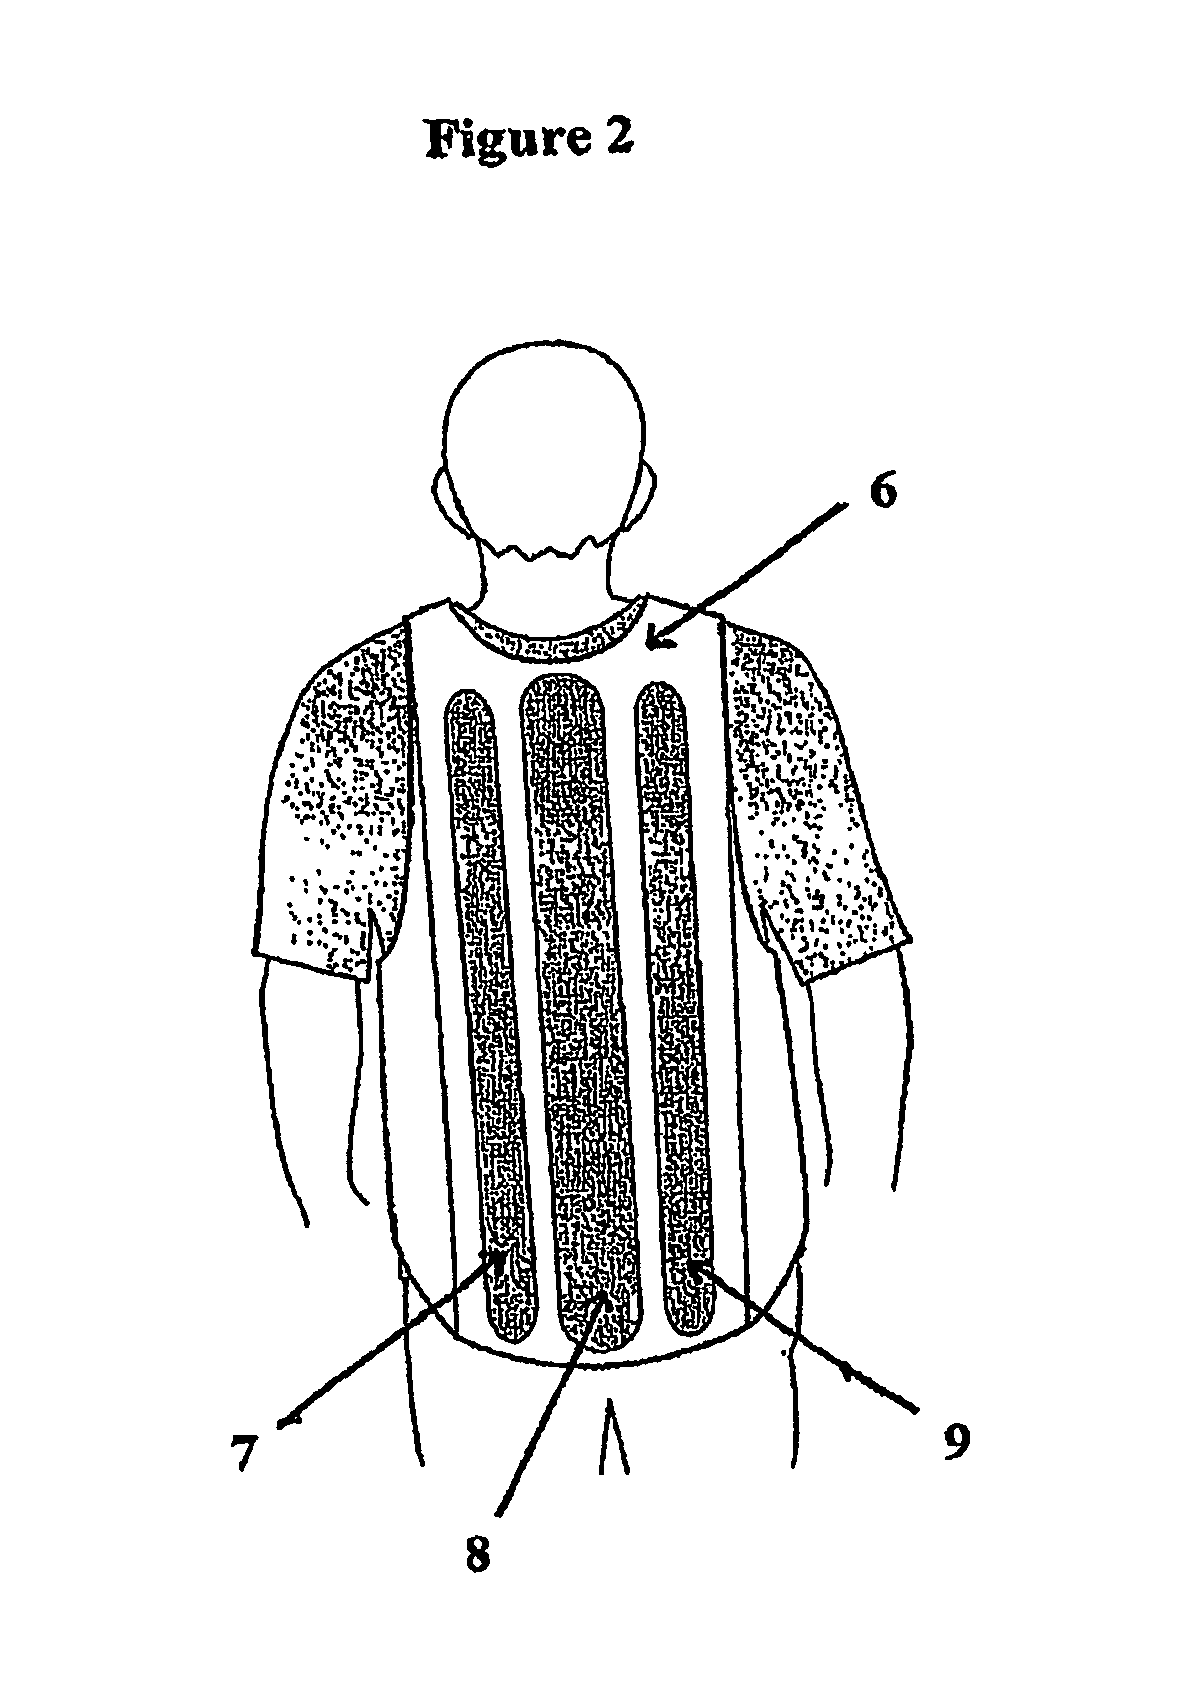 Exercise apparatus and apparel